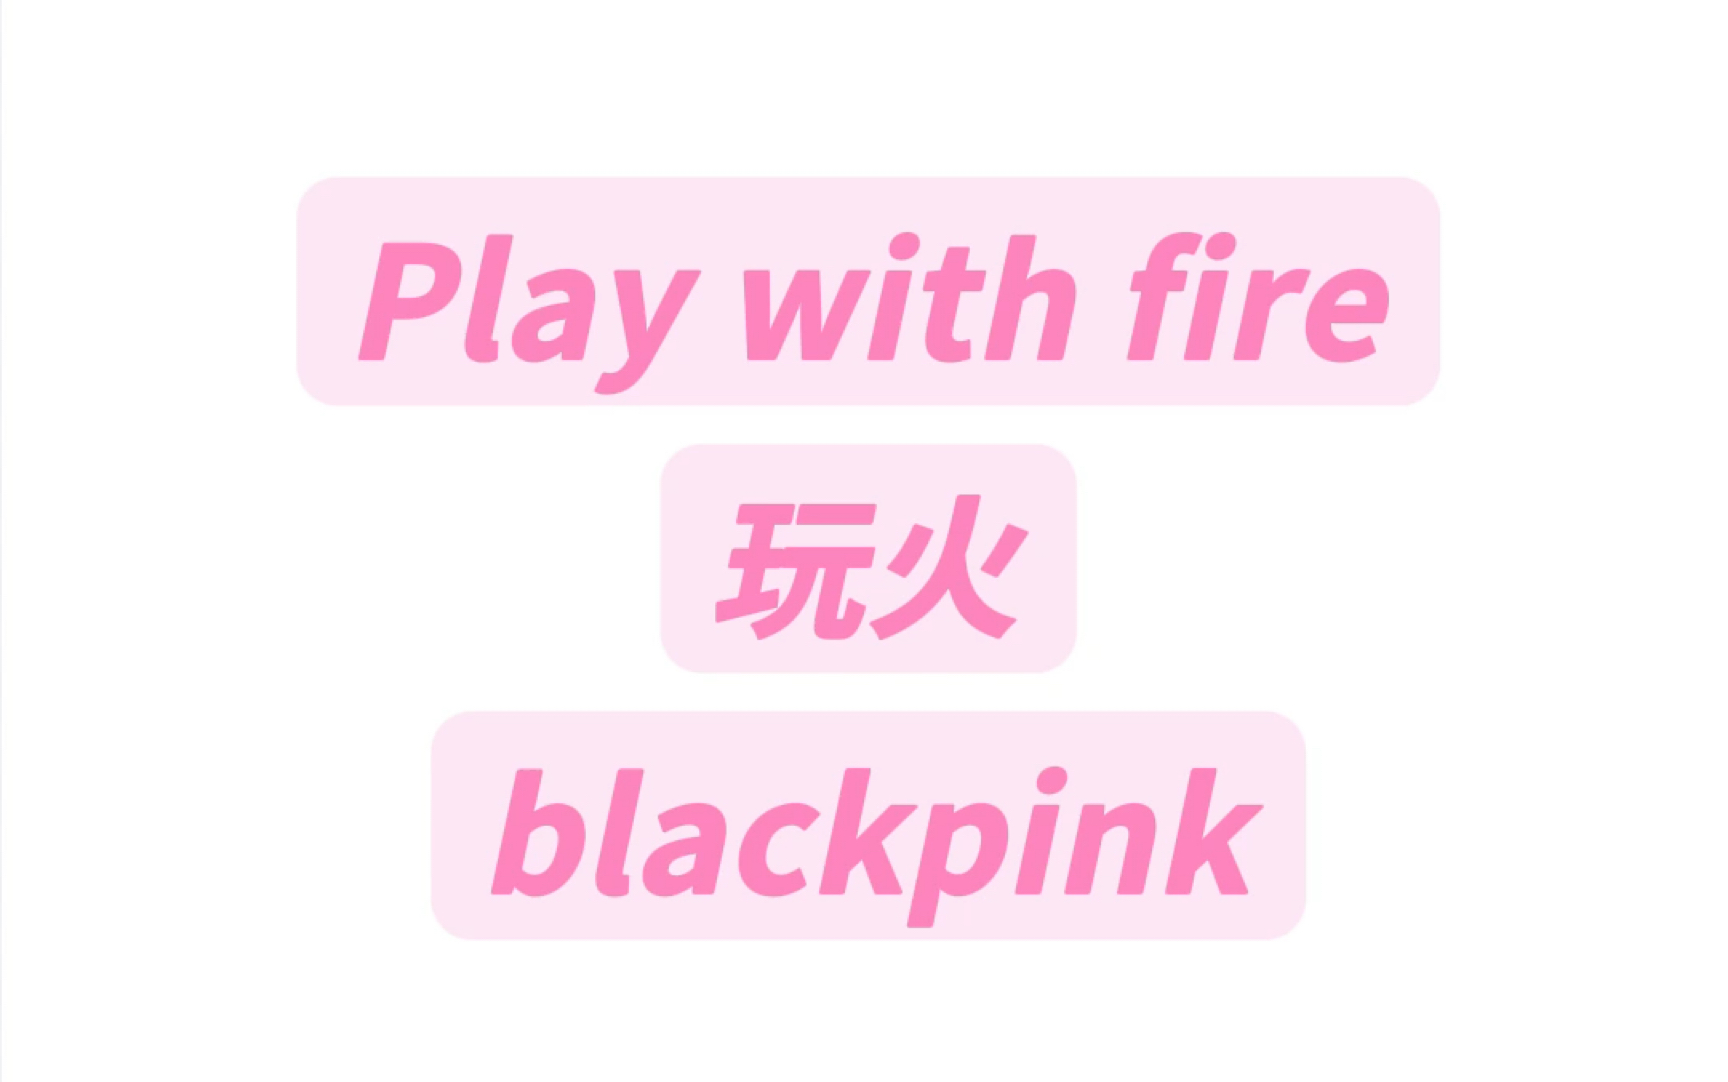 Play with fire玩火blackpink纯享版音译教学#blackpink  #playwithfire #玩火